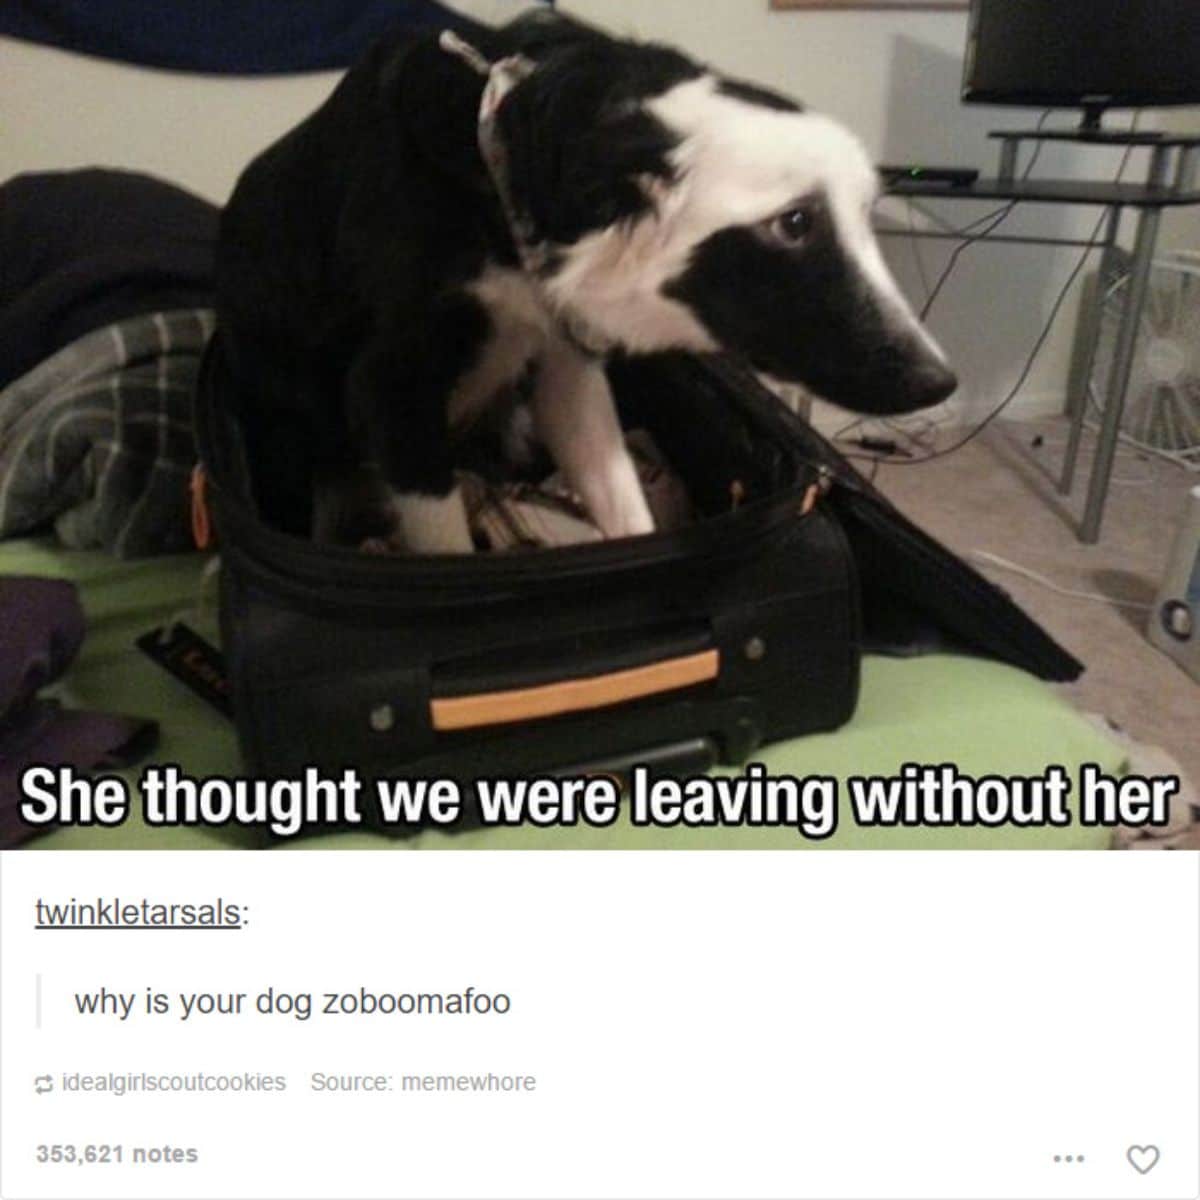 tumblr post of black and white dog in a suitcase with captions saying she thought we were leaving without her and asking why your dog is zoboomafoo